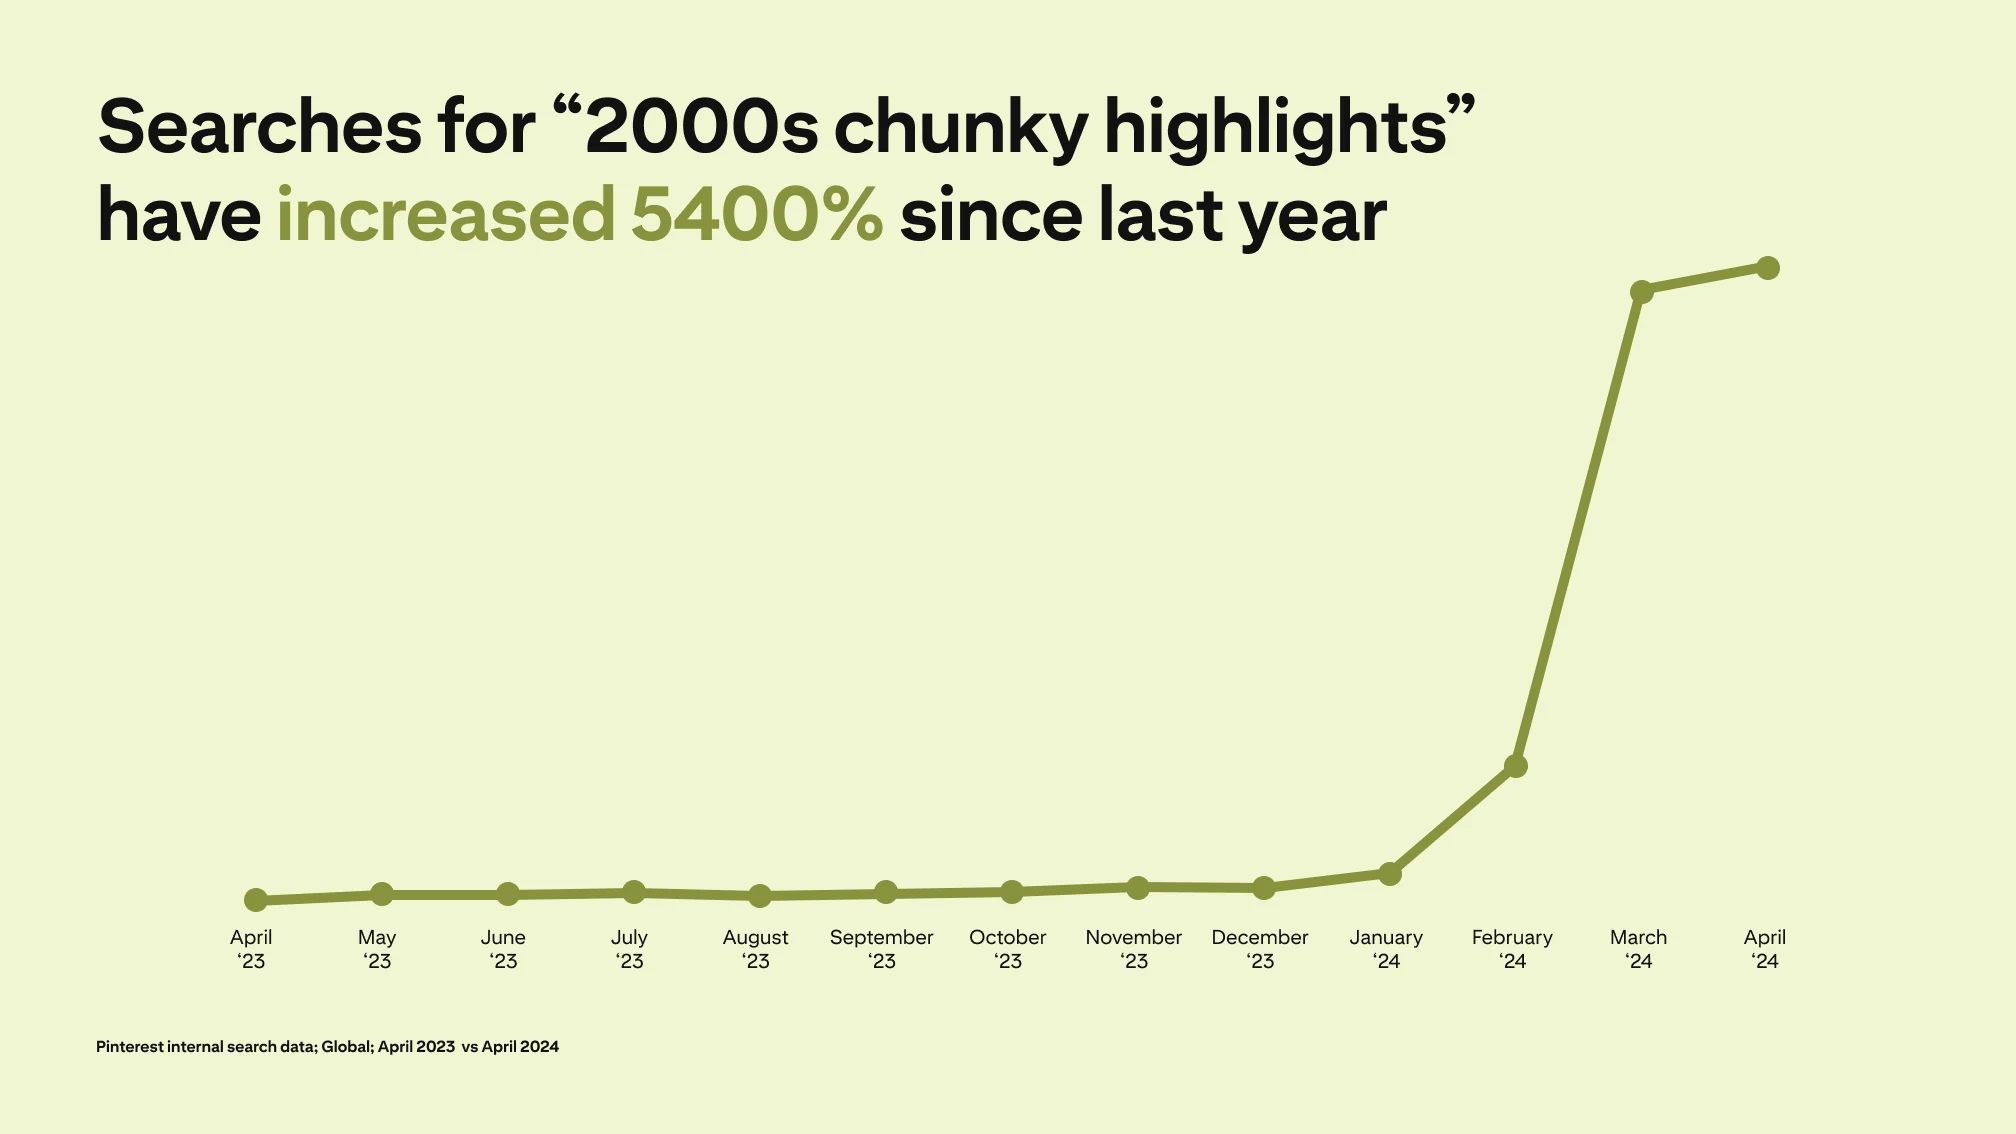 A line graph depicts searches for "2000s chunky highlights" increasing 5400% since last year